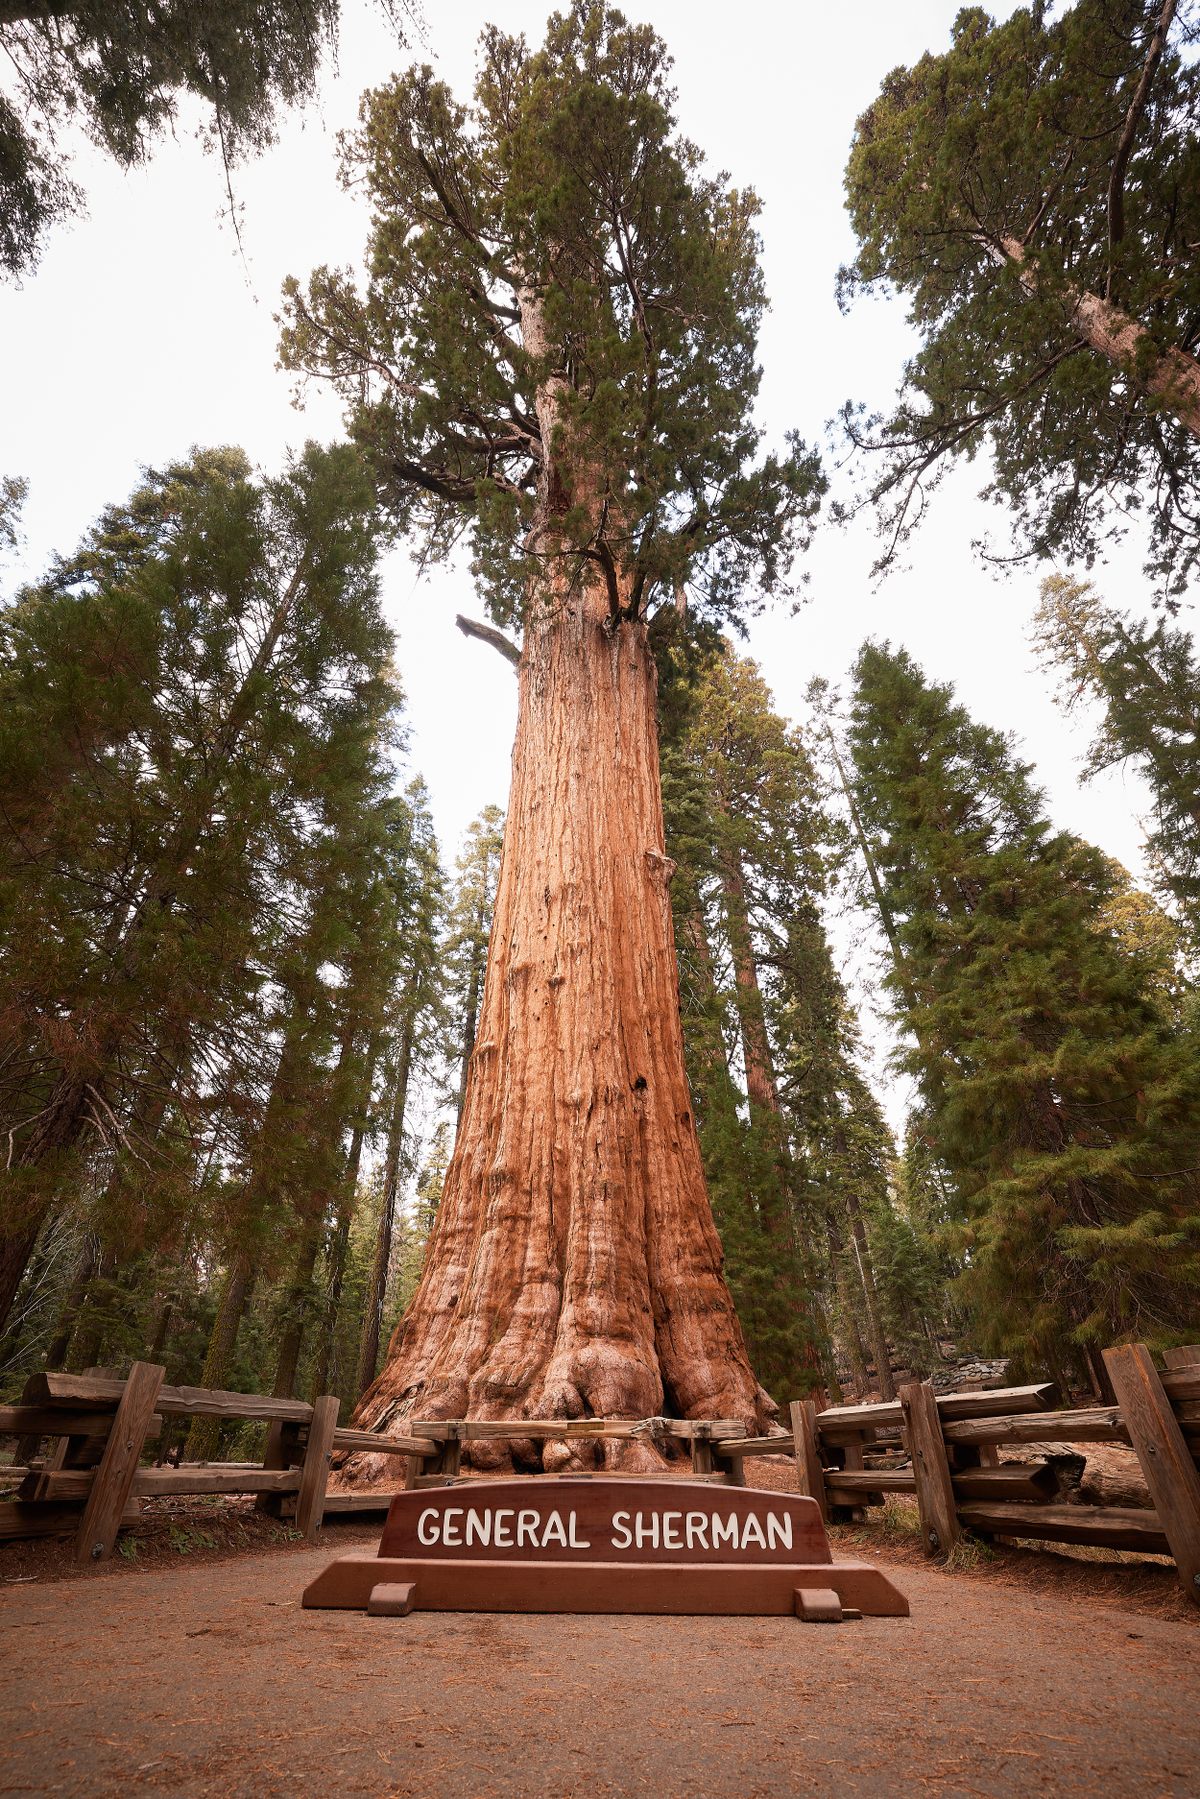 This tree has been growing taller for over 2,000 years.